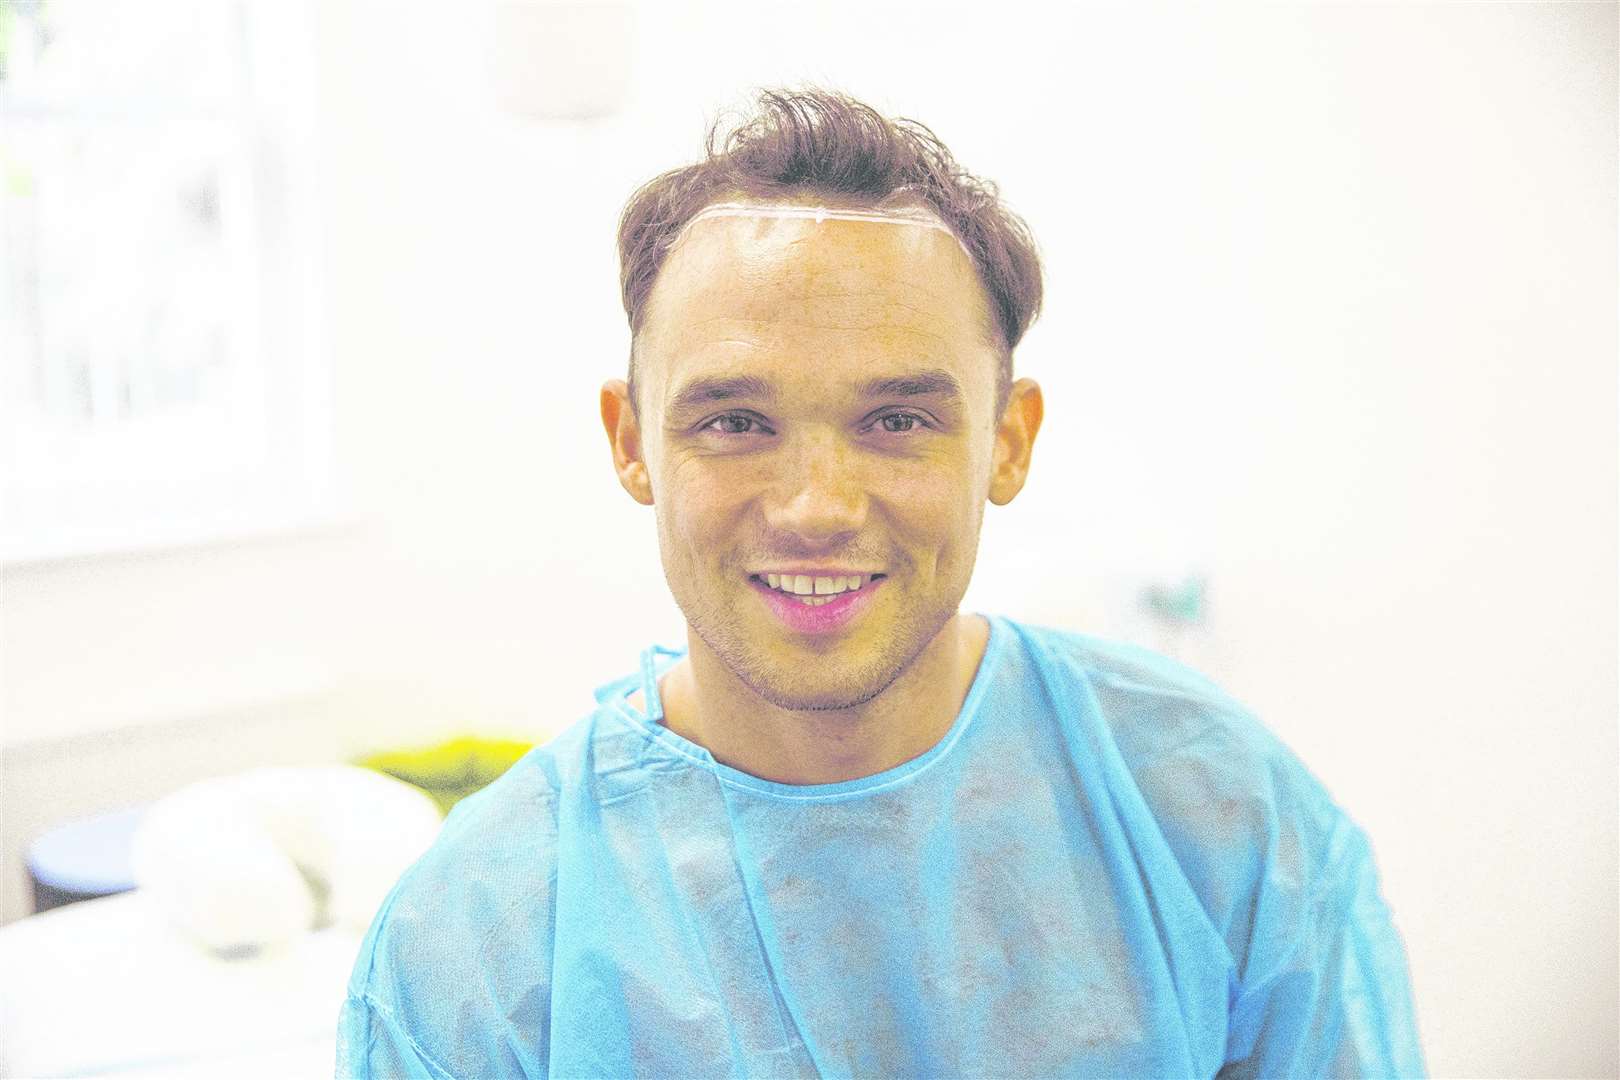 Gareth Gates visited Maidstone once before to undergo a hair transplant. Picture: SWNS